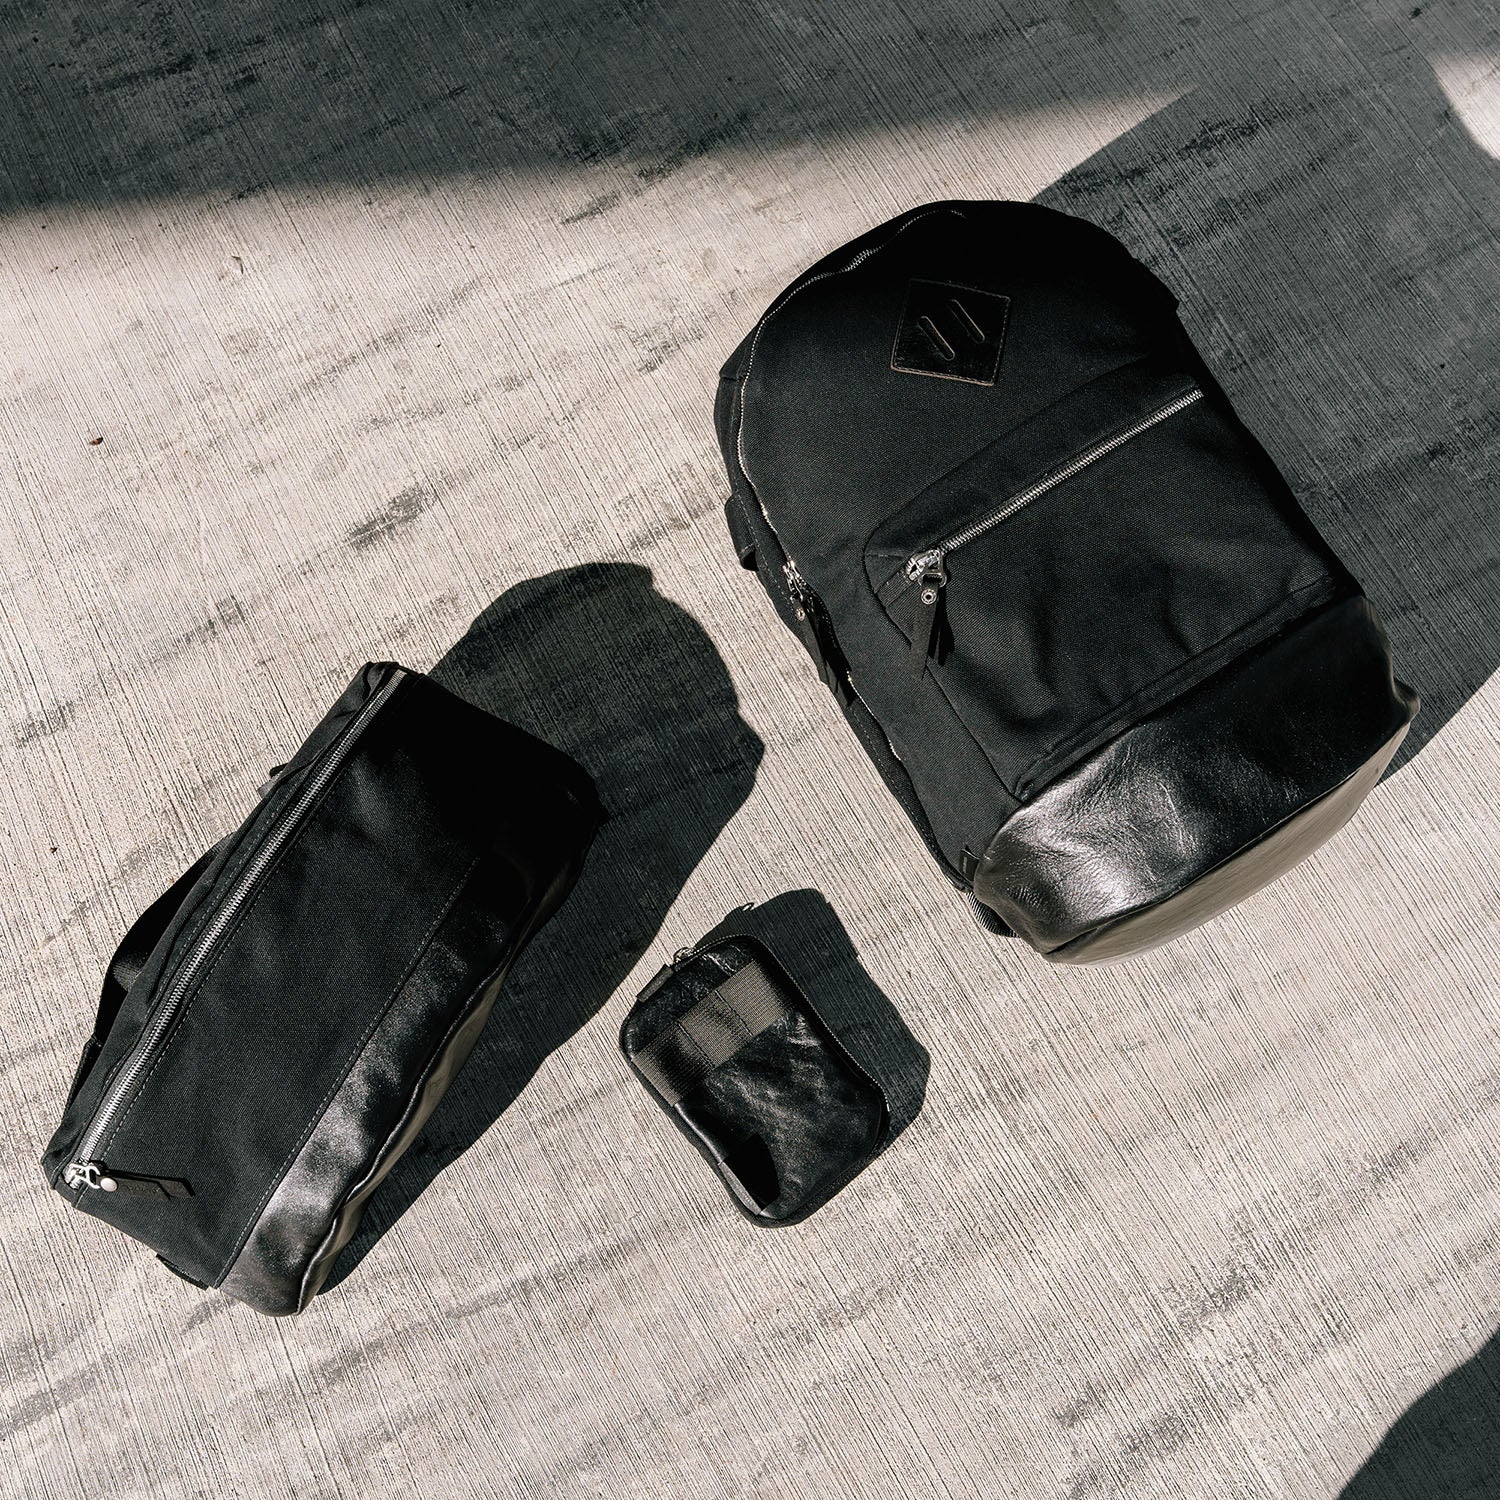 A trio of black canvas bags with black leather bottoms on a concrete floor.